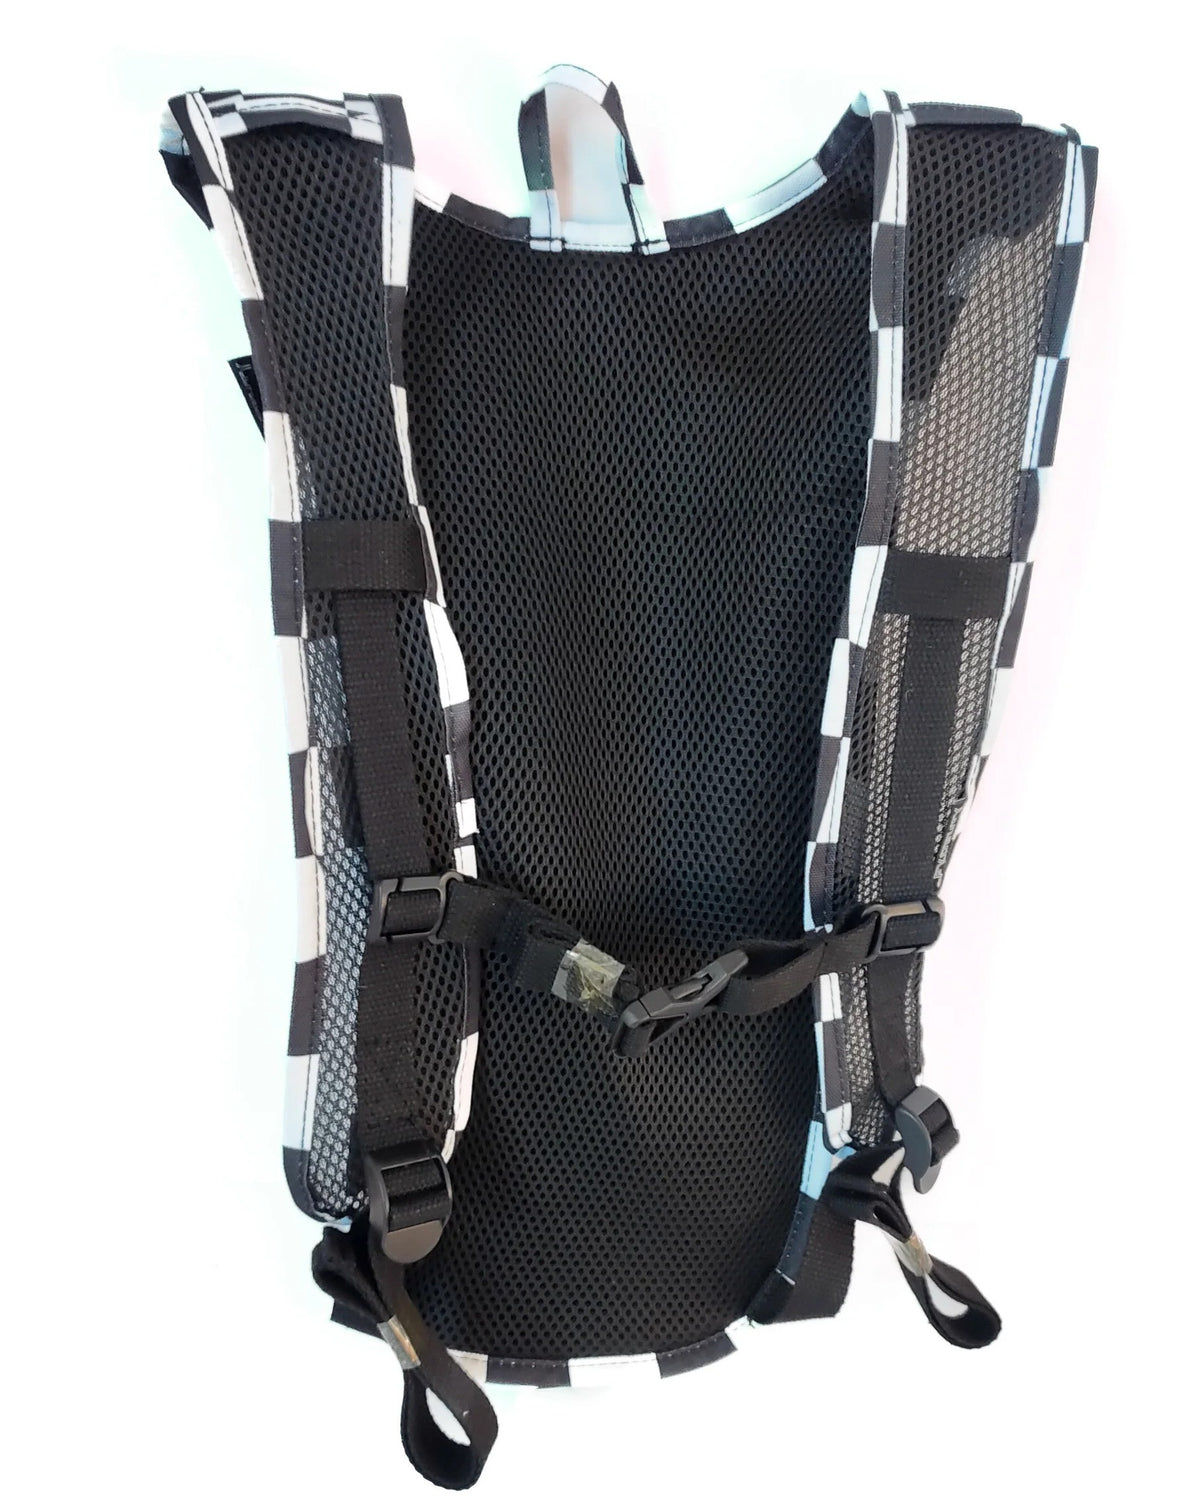 Groovy Black & White Hydration Backpack